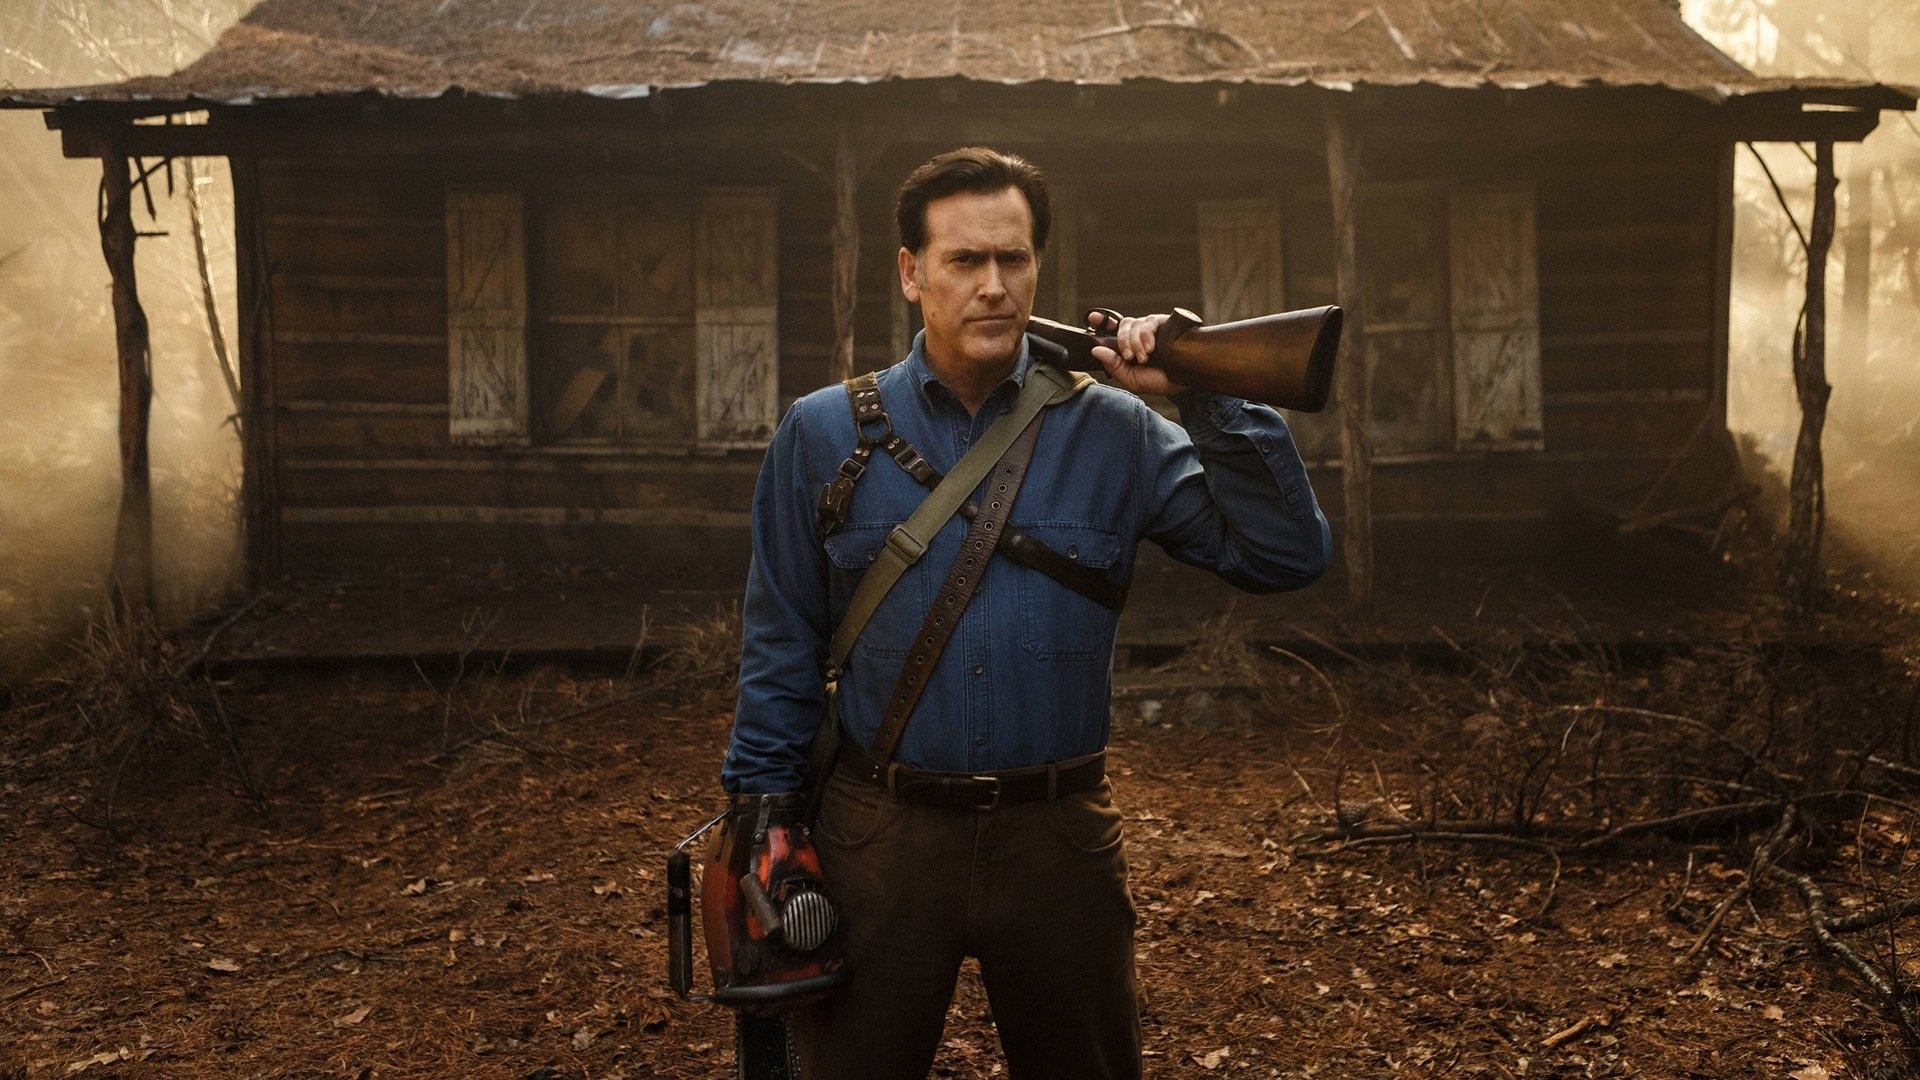 Bruce Campbell: Ash Williams, A character armed with a sawed-off shotgun and a chainsaw strapped to the stump on his right arm. 1920x1080 Full HD Wallpaper.